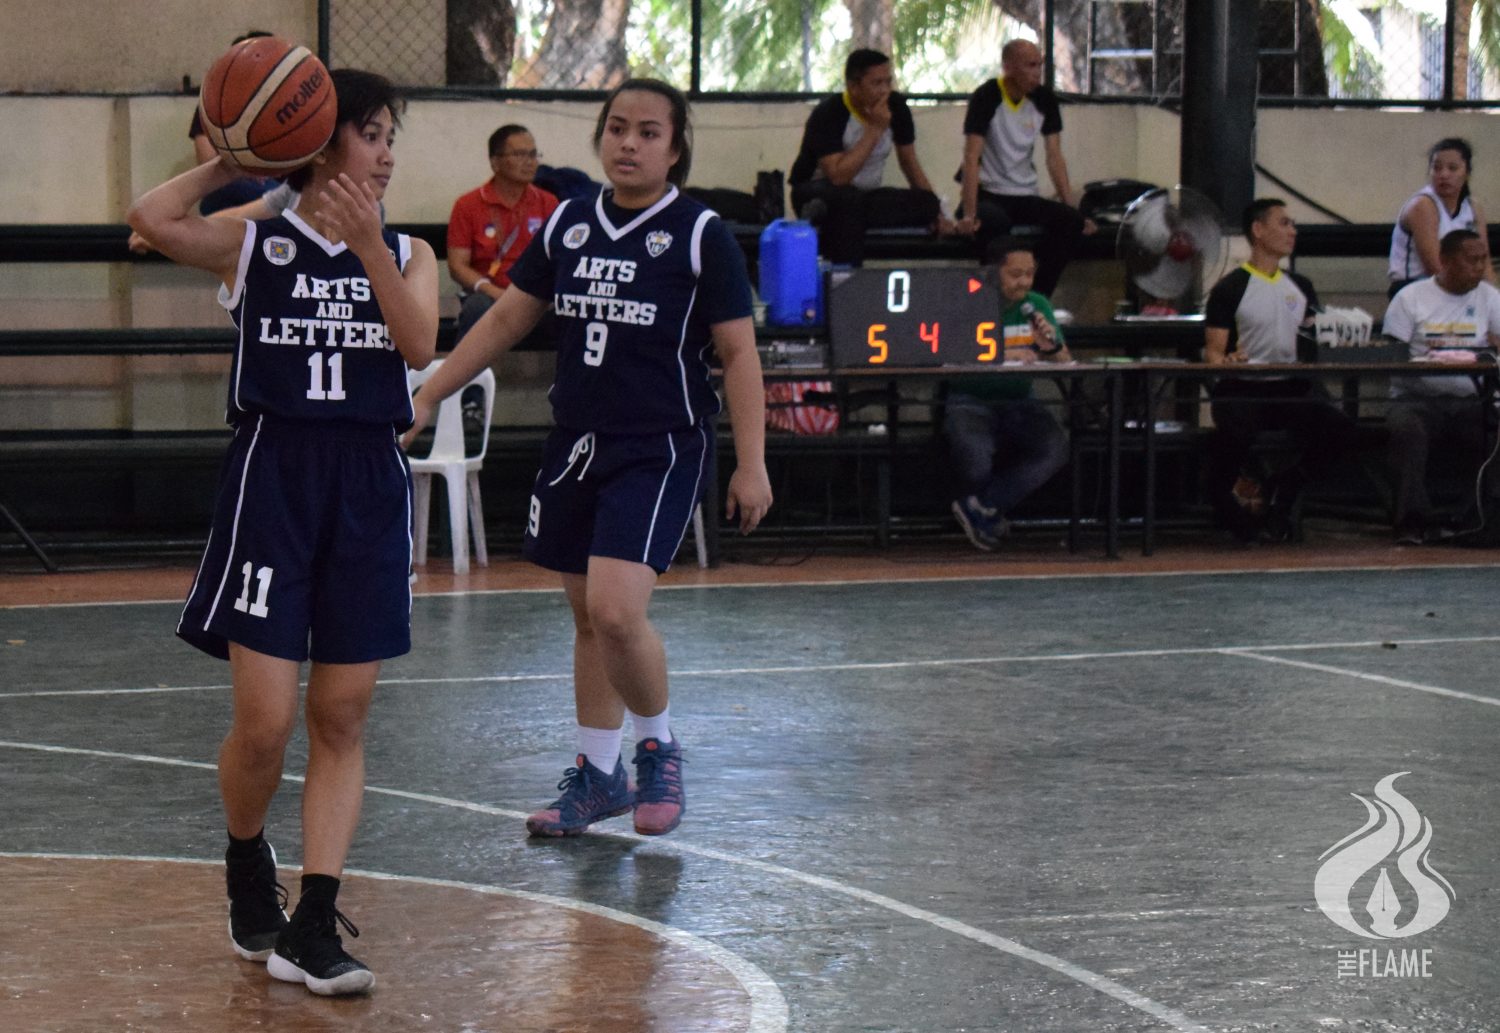 AB Women’s basketball loses championship spot to IPEA